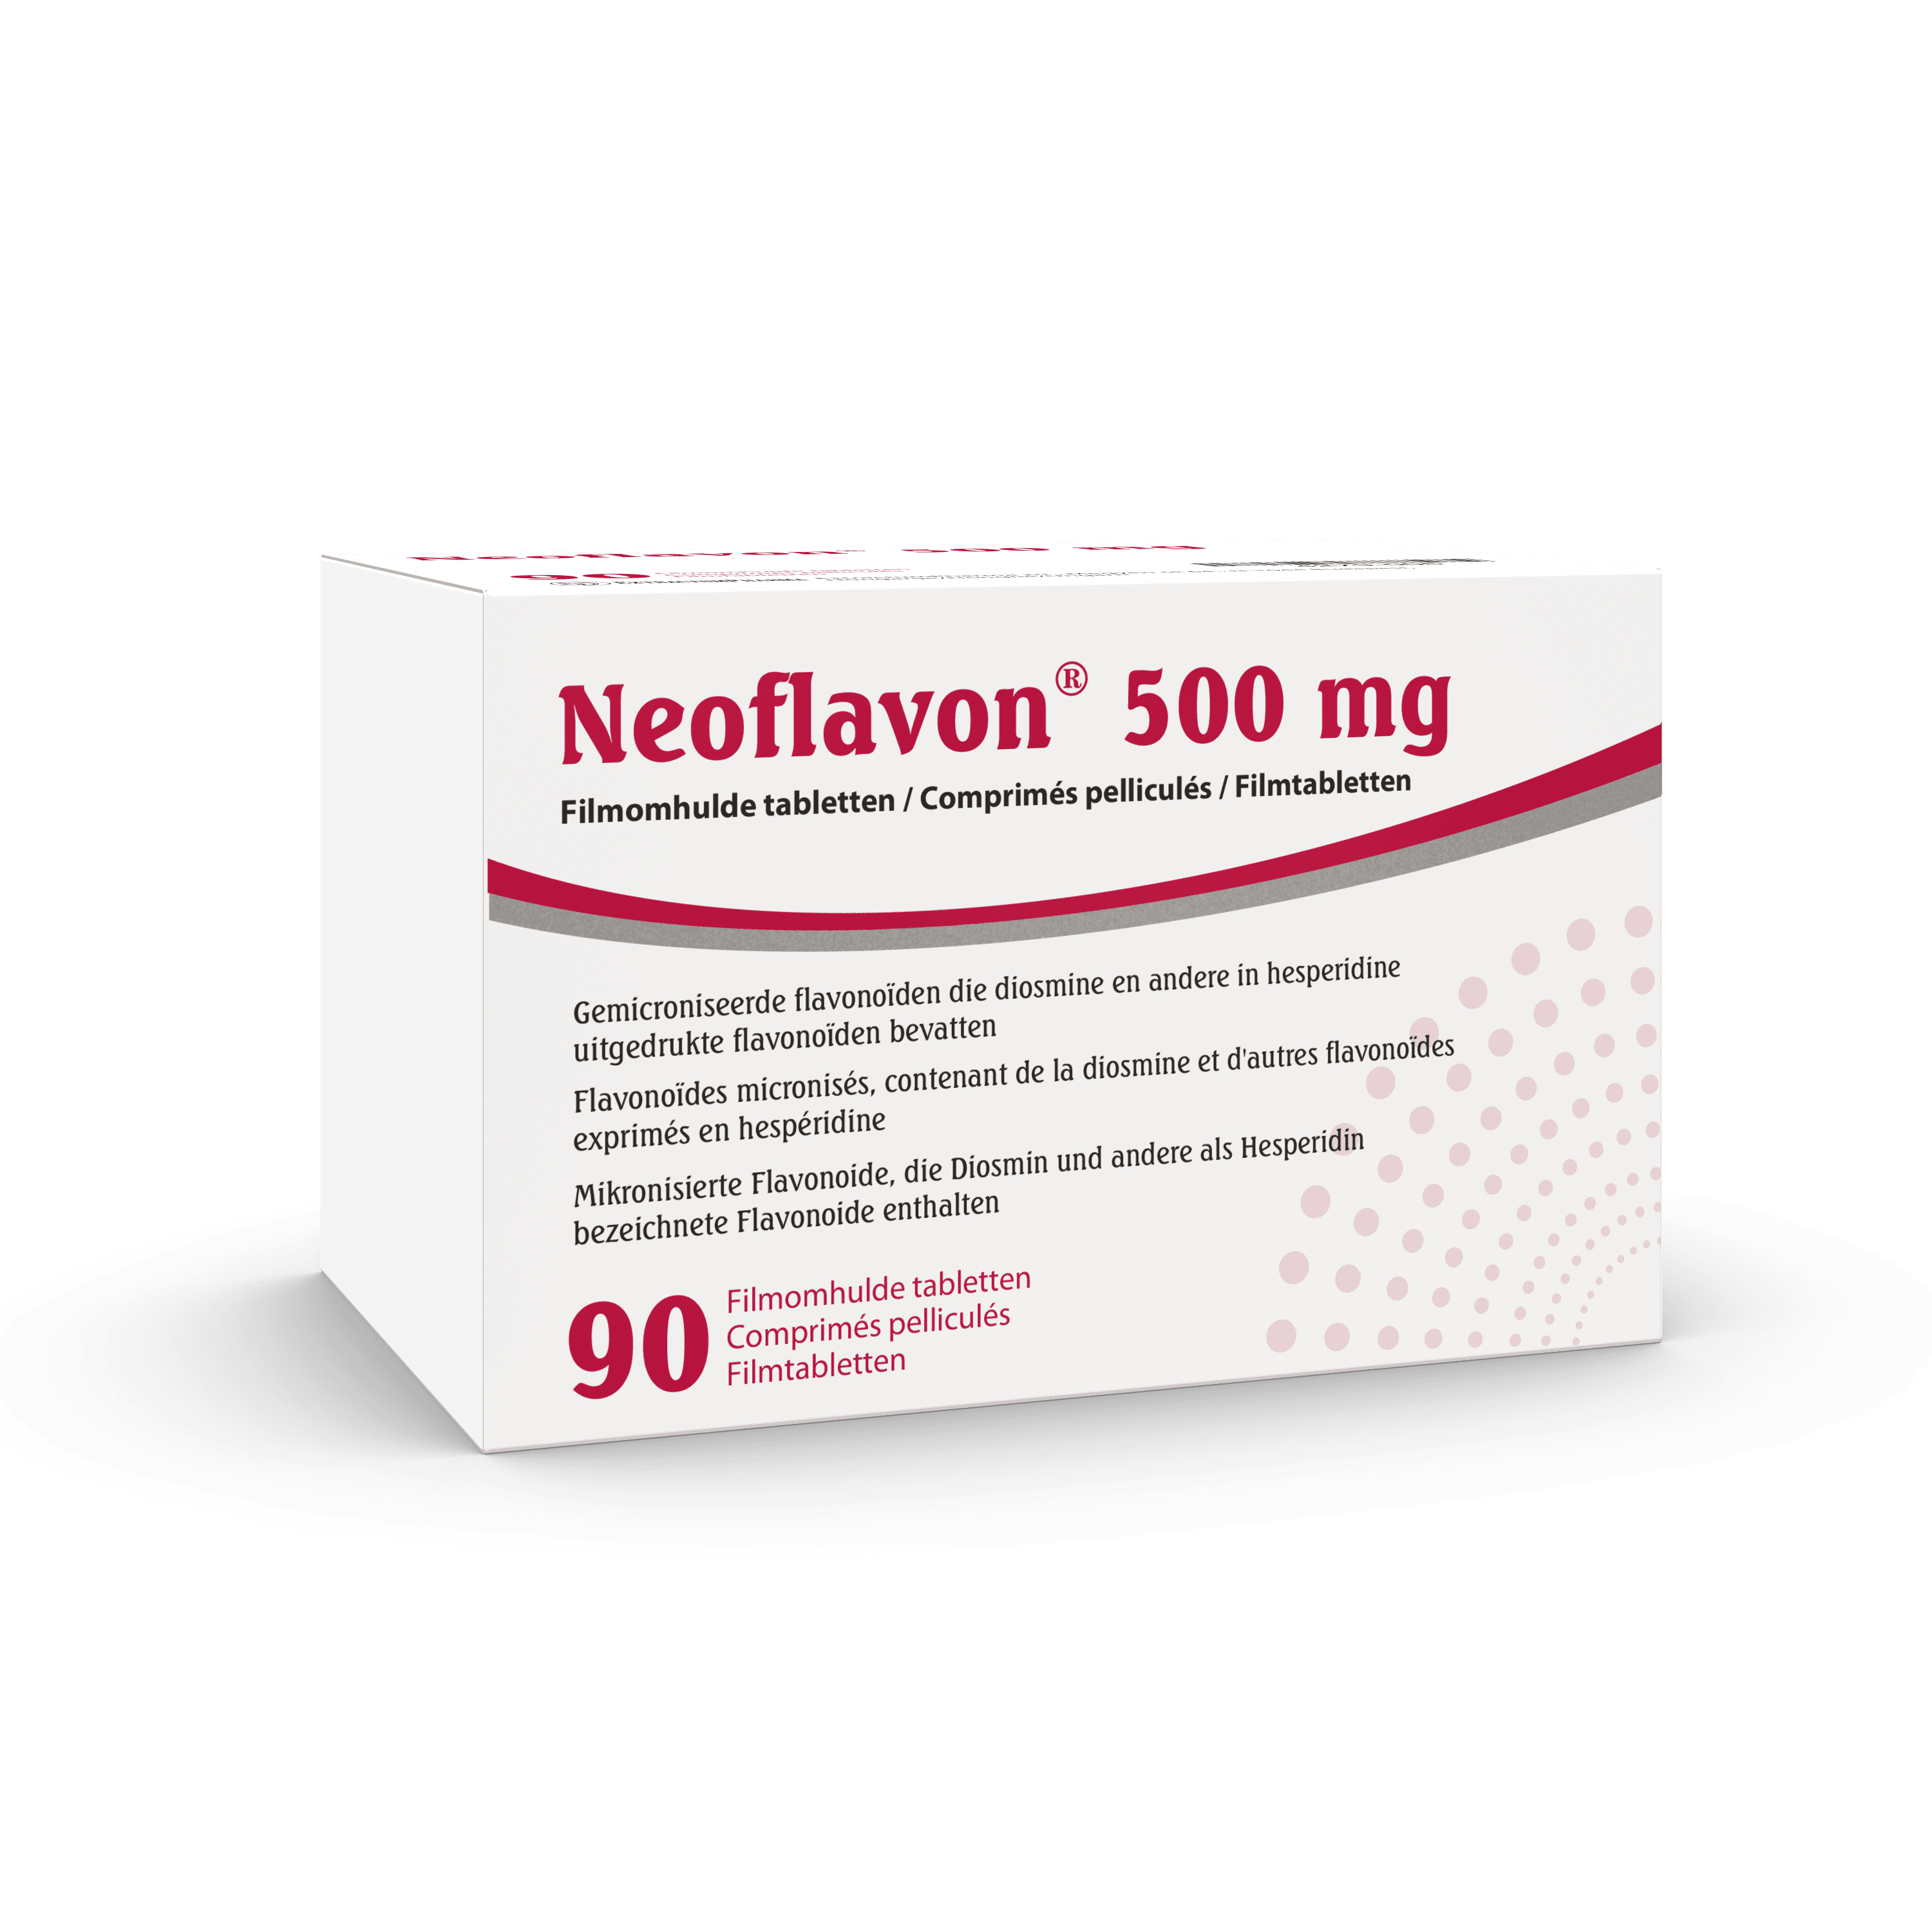 Neoflavon 500 mg